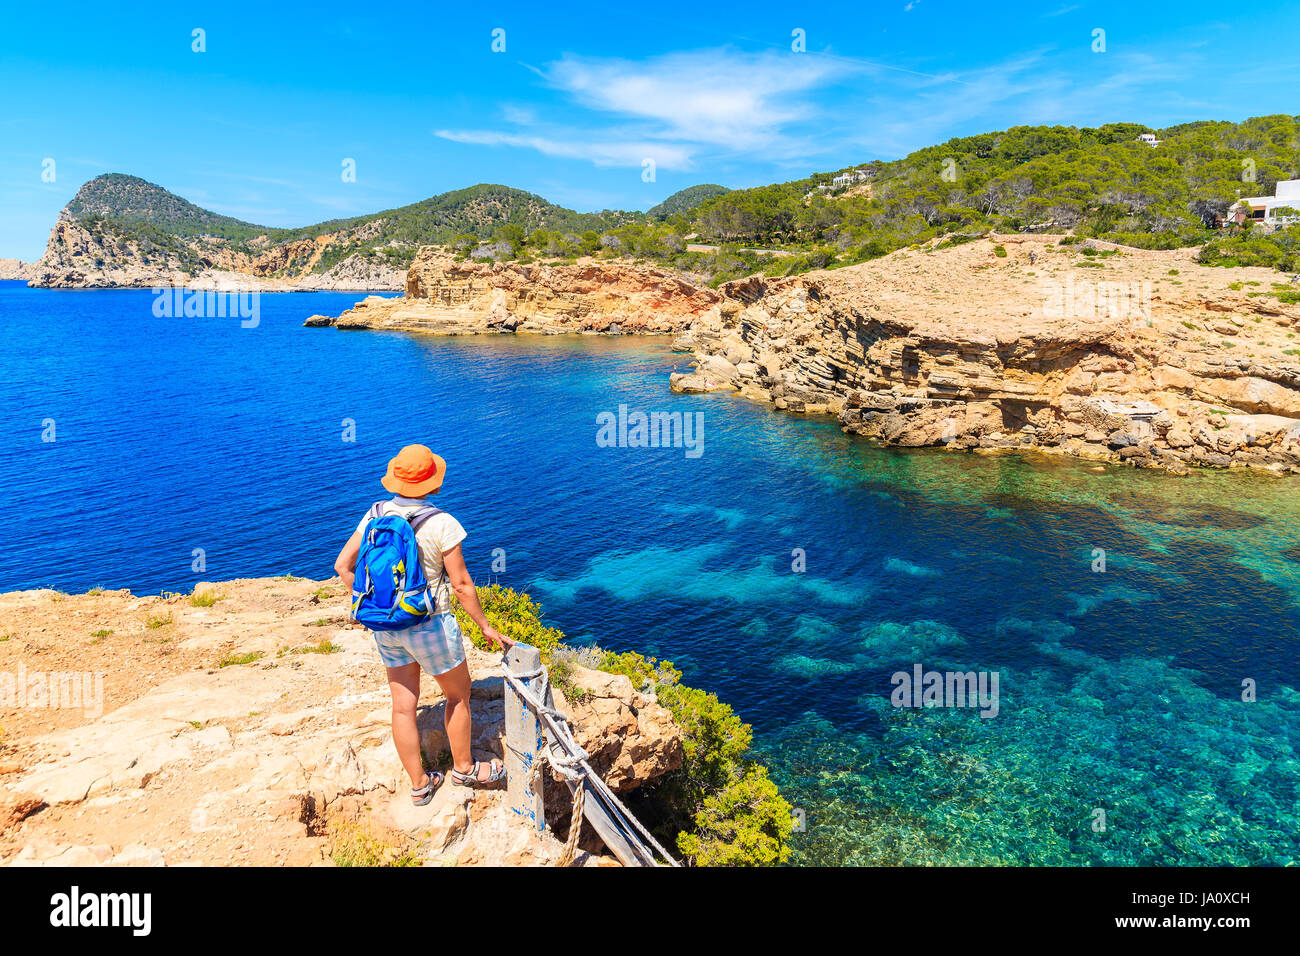 Young woman tourist backpacker standing on cliff and looking at Punta Galera bay surrounded by amazing stone formations, Ibiza island, Spain Stock Photo